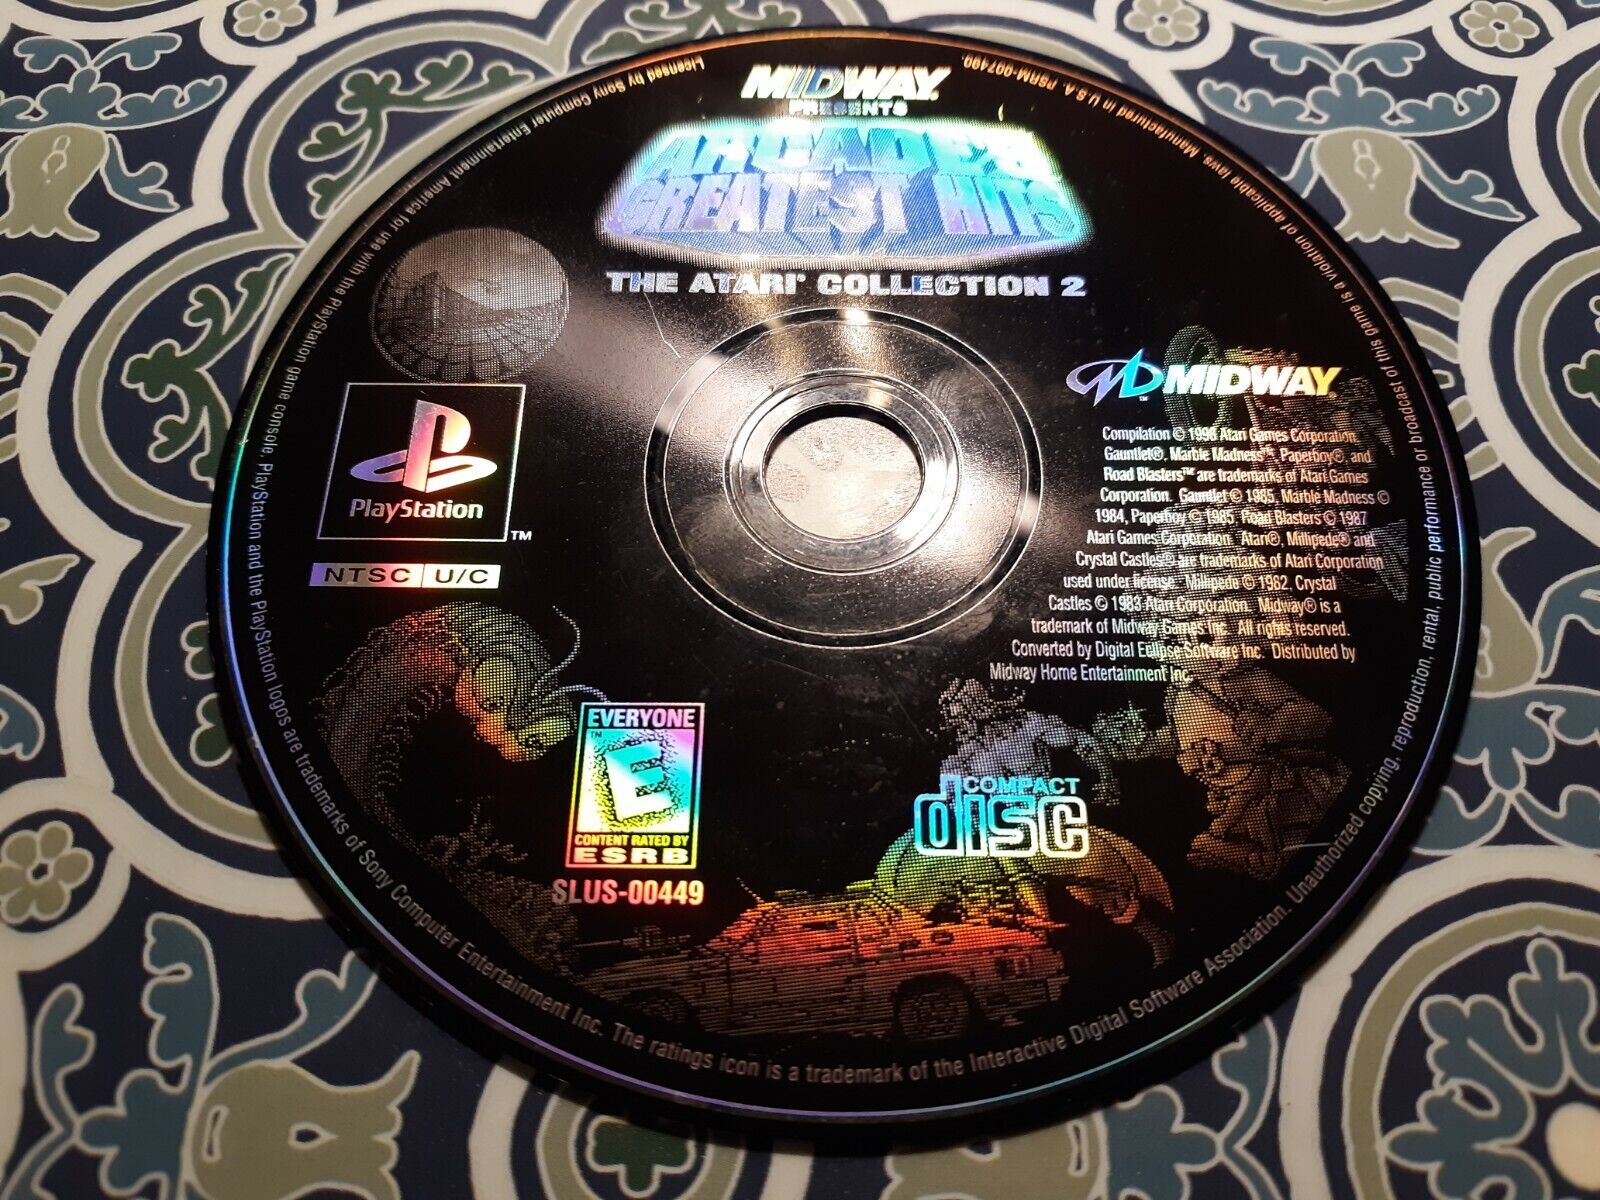 Arcade's Greatest Hits: The Atari Collection 2 (Sony PlayStation 1, 1998)